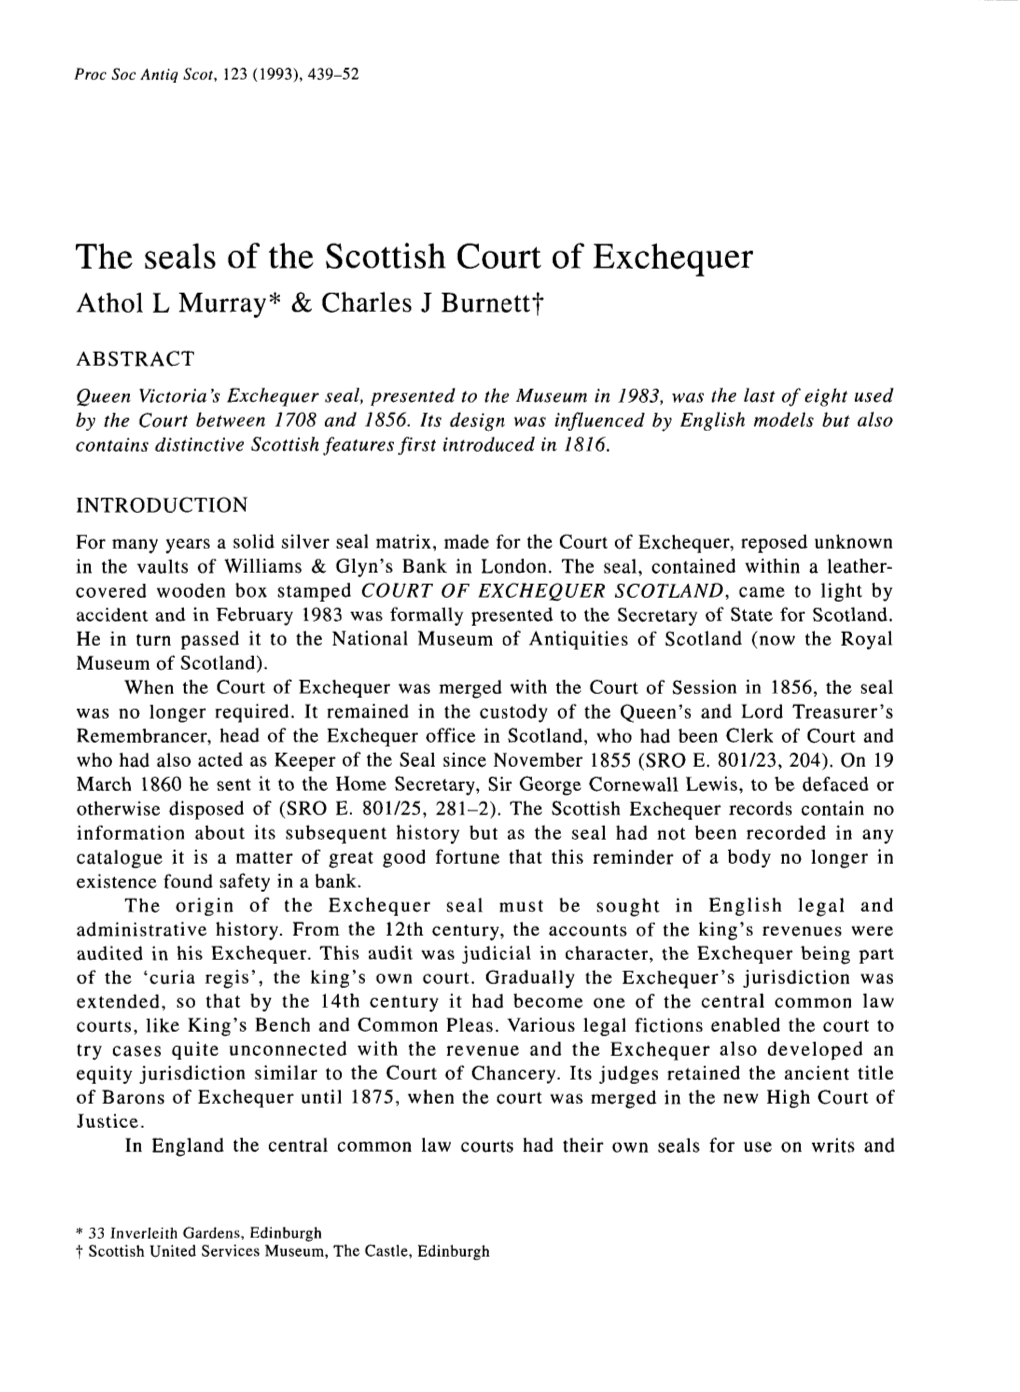 The Seals of the Scottish Court of Exchequer 443